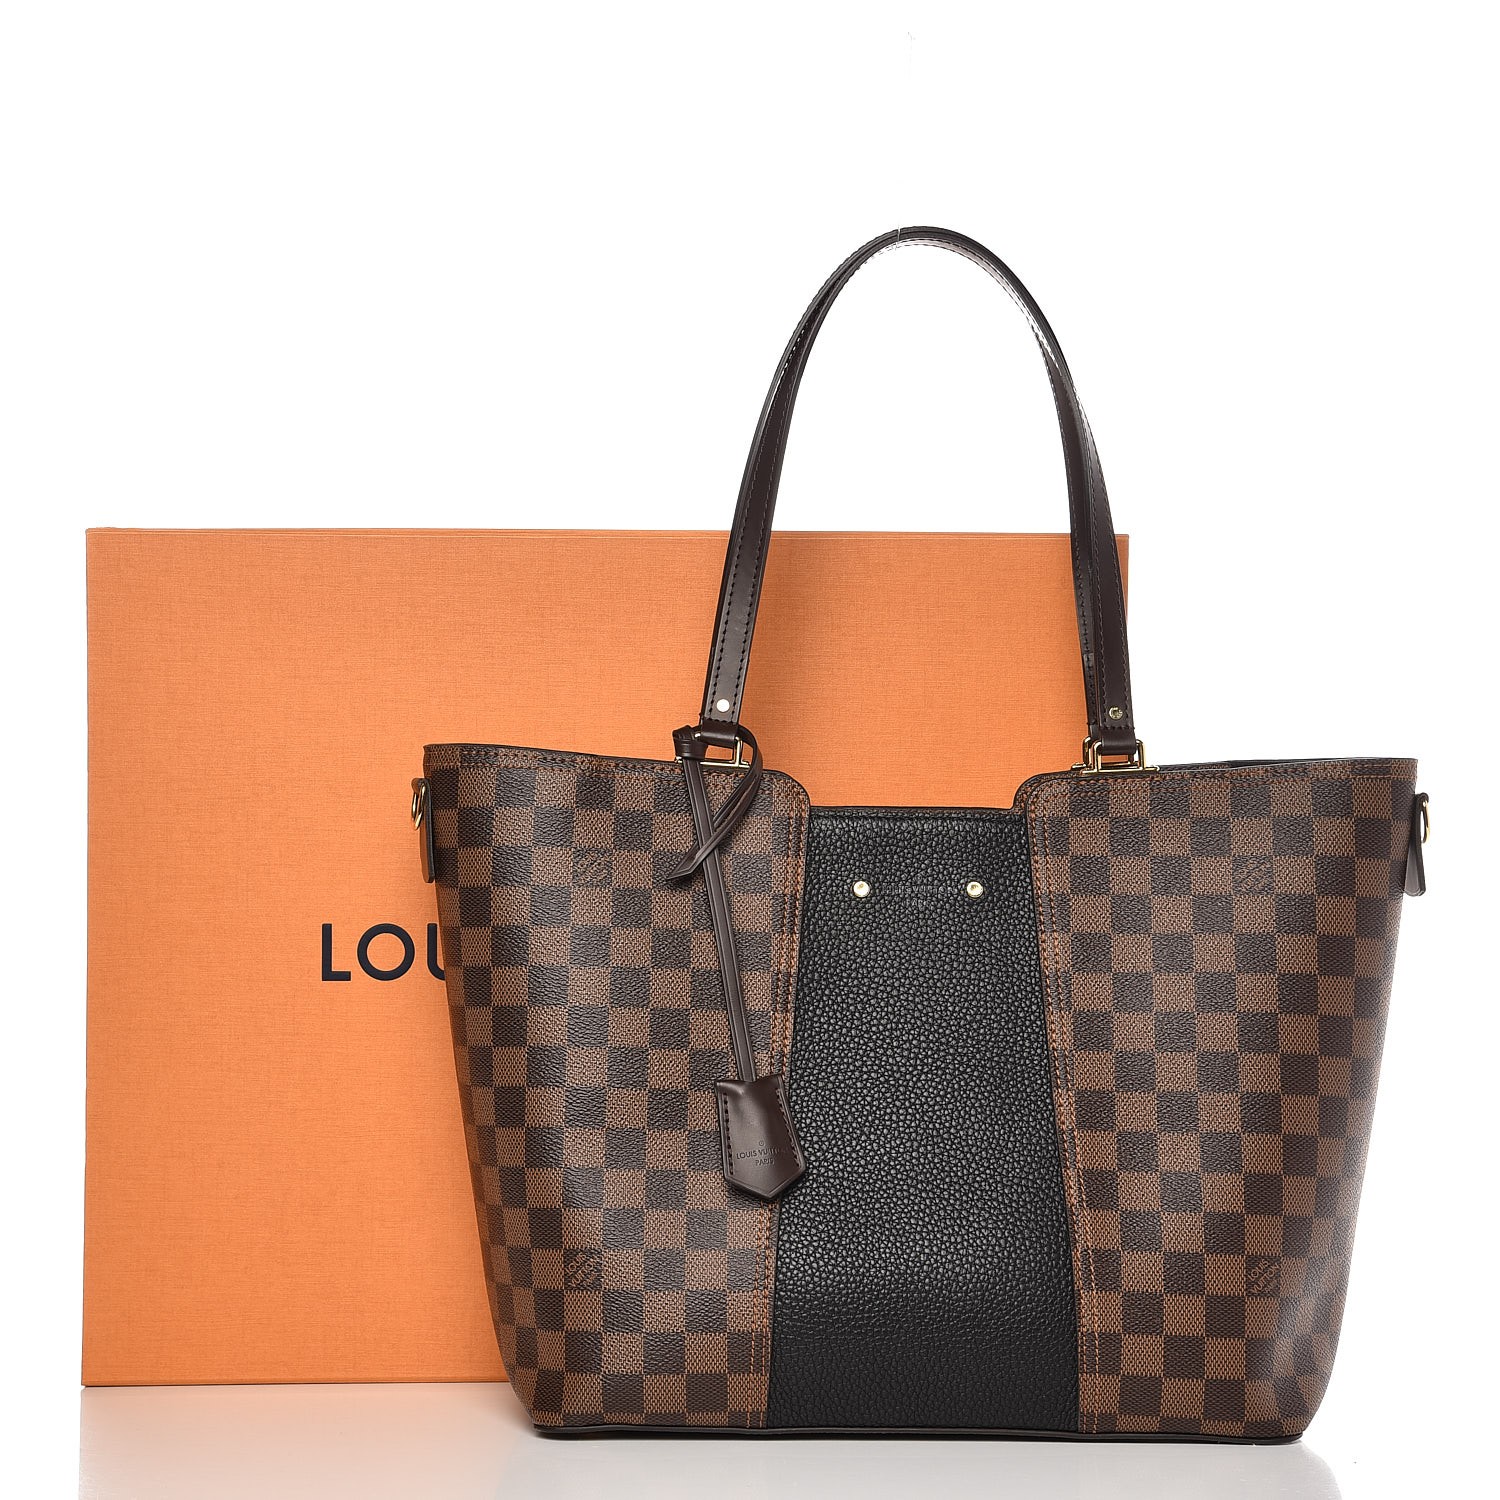 Authentic Louis Vuitton Damier Ebene with Black Leather Jersey Tote Bag